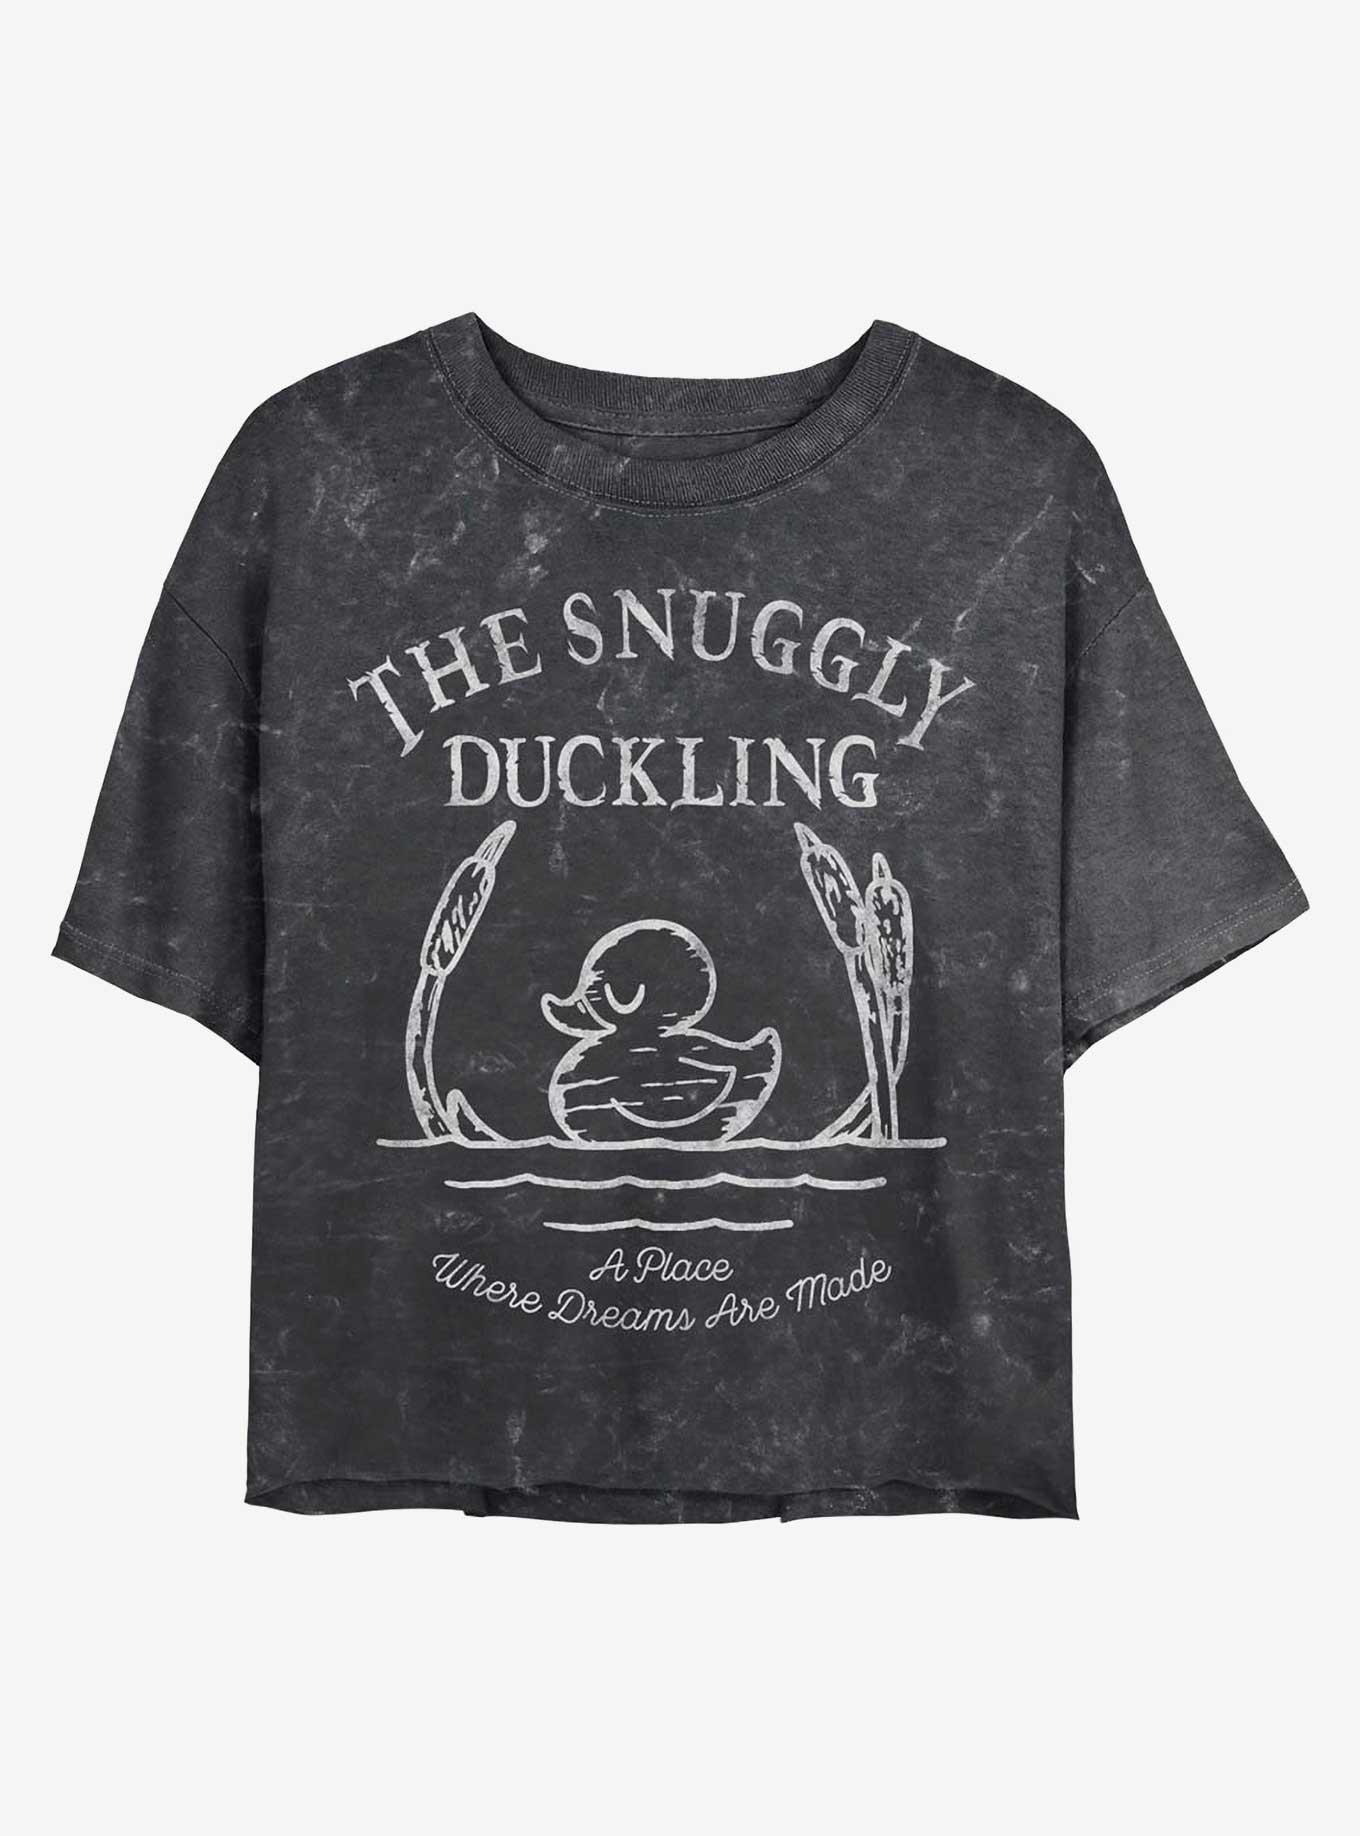 Disney Tangled The Snuggly Duckling Mineral Wash Crop Girls T-Shirt, BLACK, hi-res